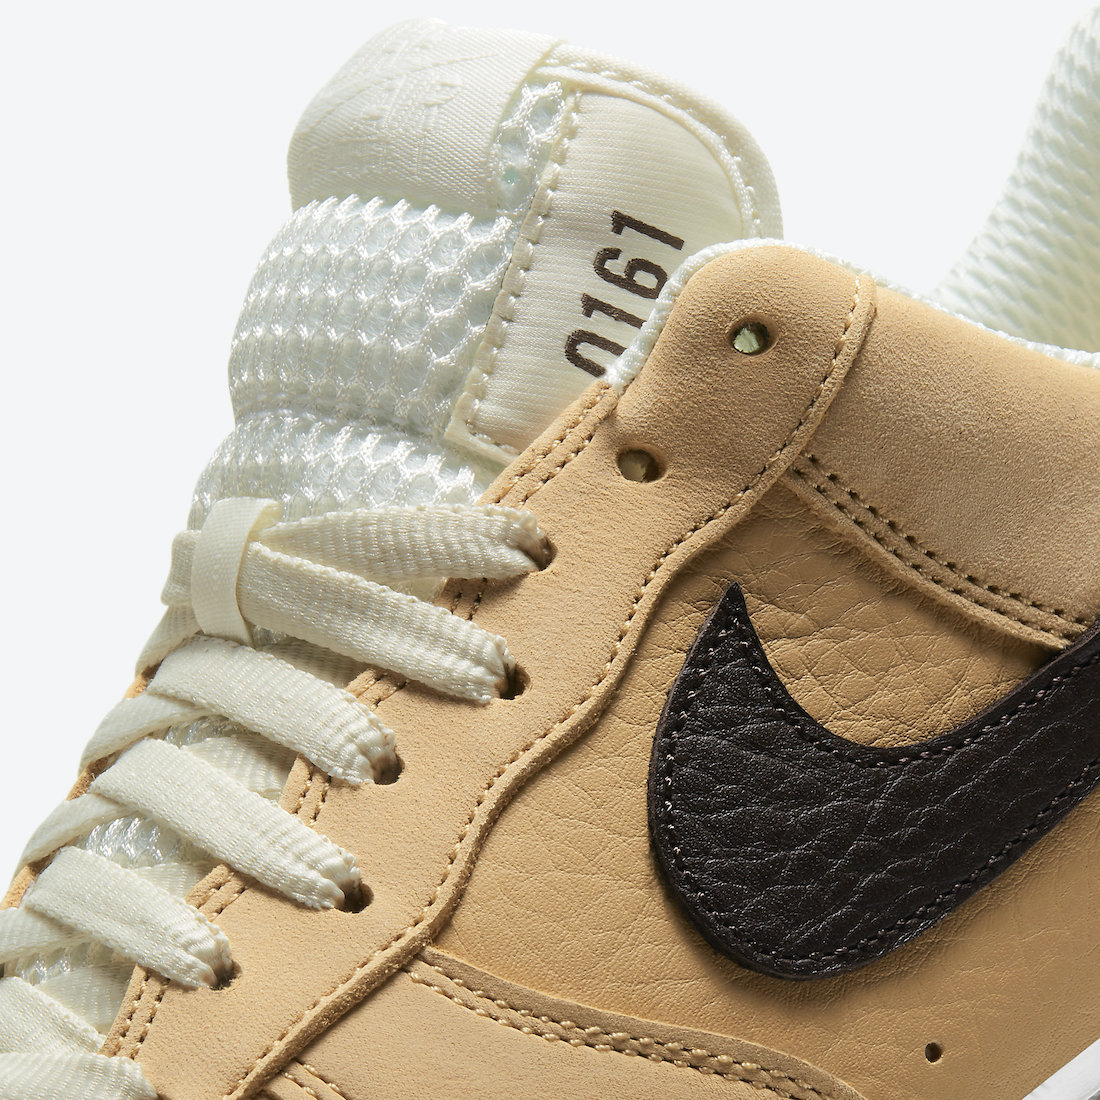 Nike Air Force 1 Manchester Bee DC1939-200 Release Date Info